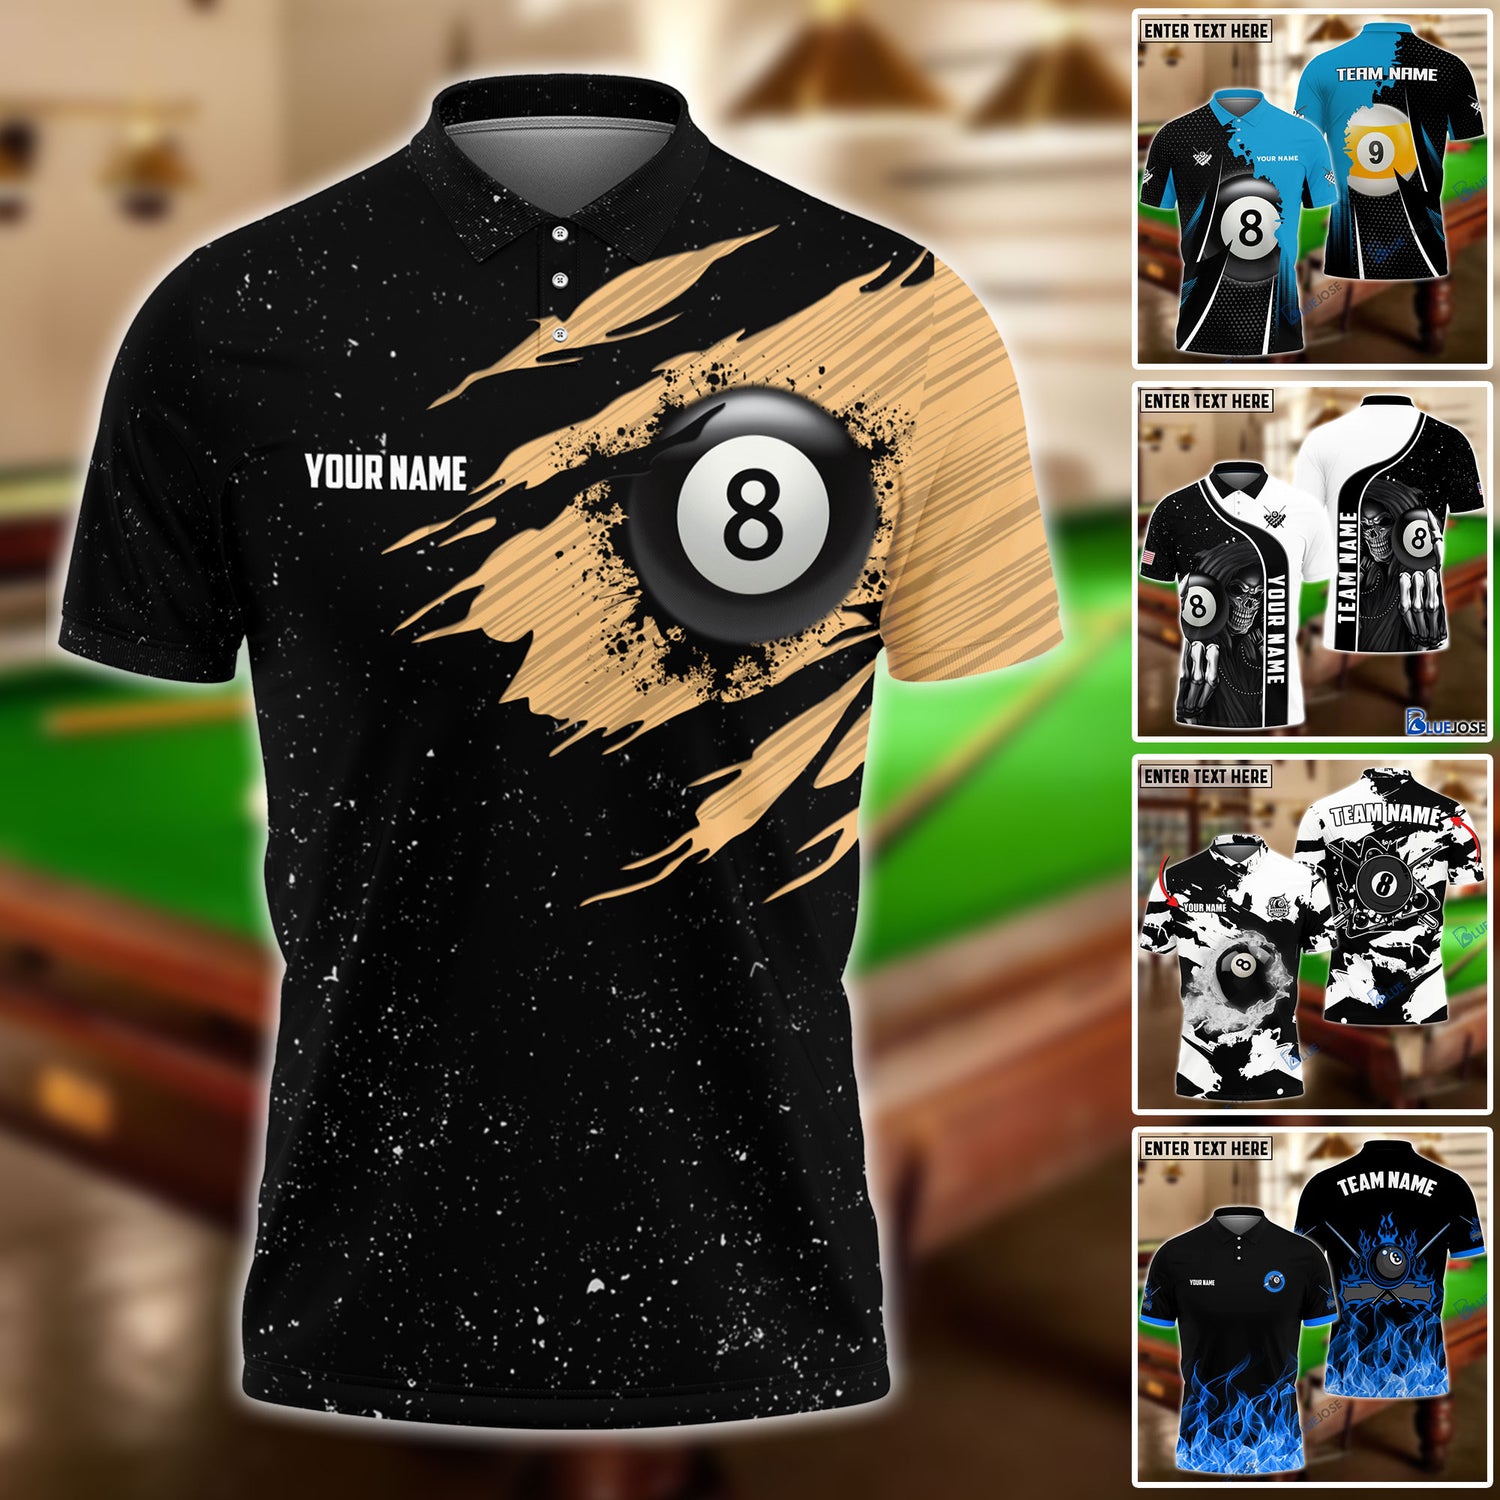 Billiards New Shirt For You & Your Team